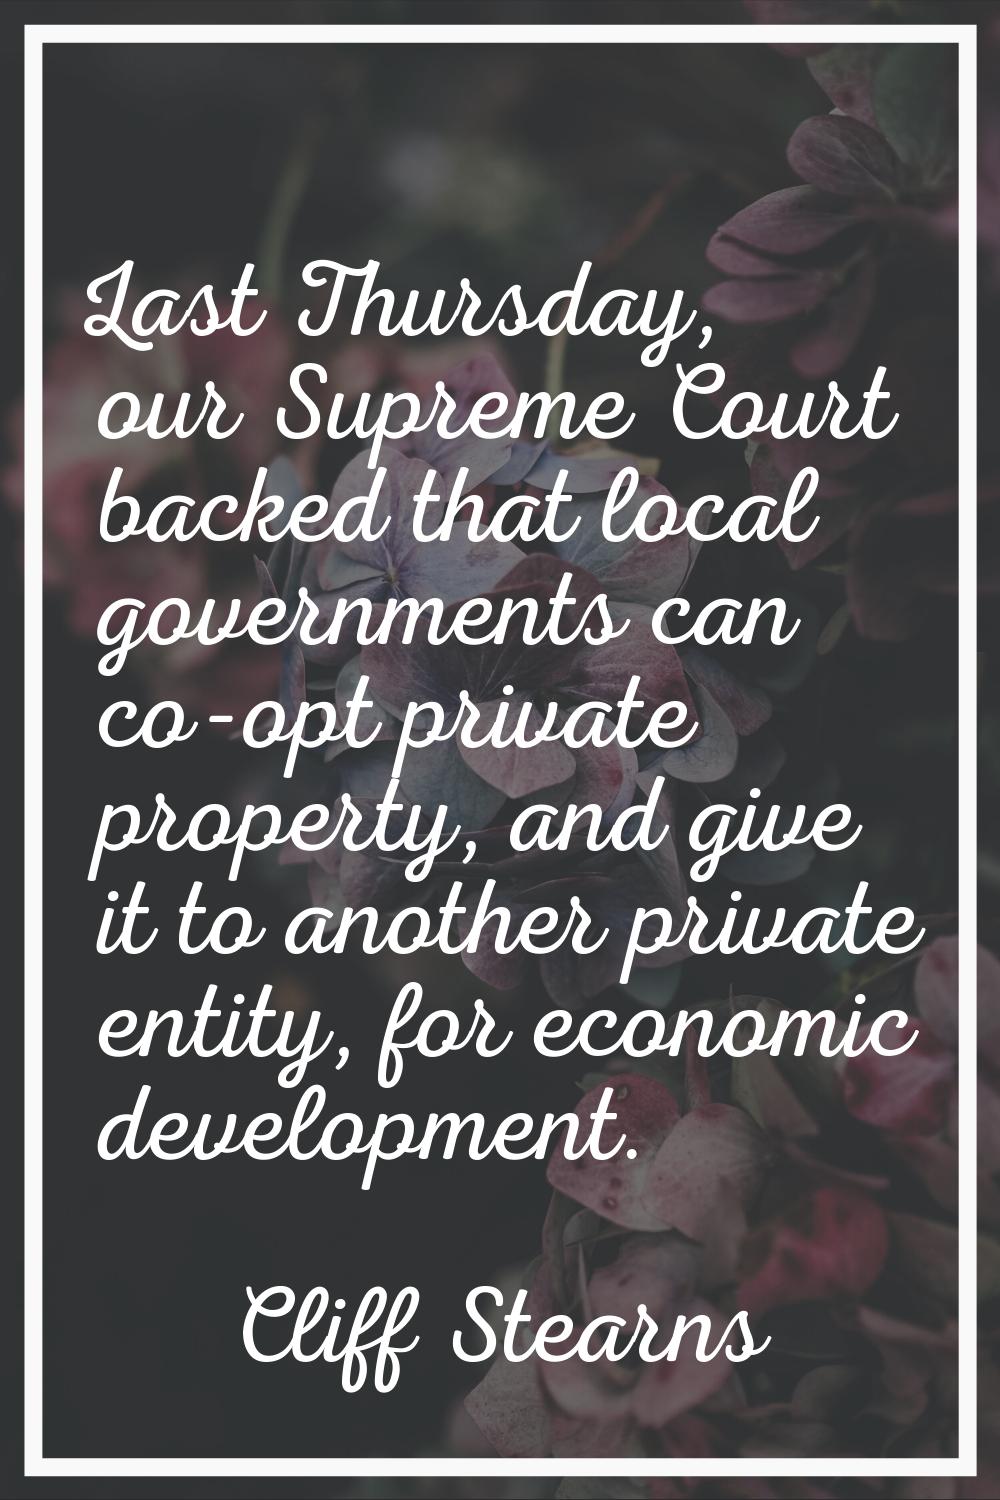 Last Thursday, our Supreme Court backed that local governments can co-opt private property, and giv